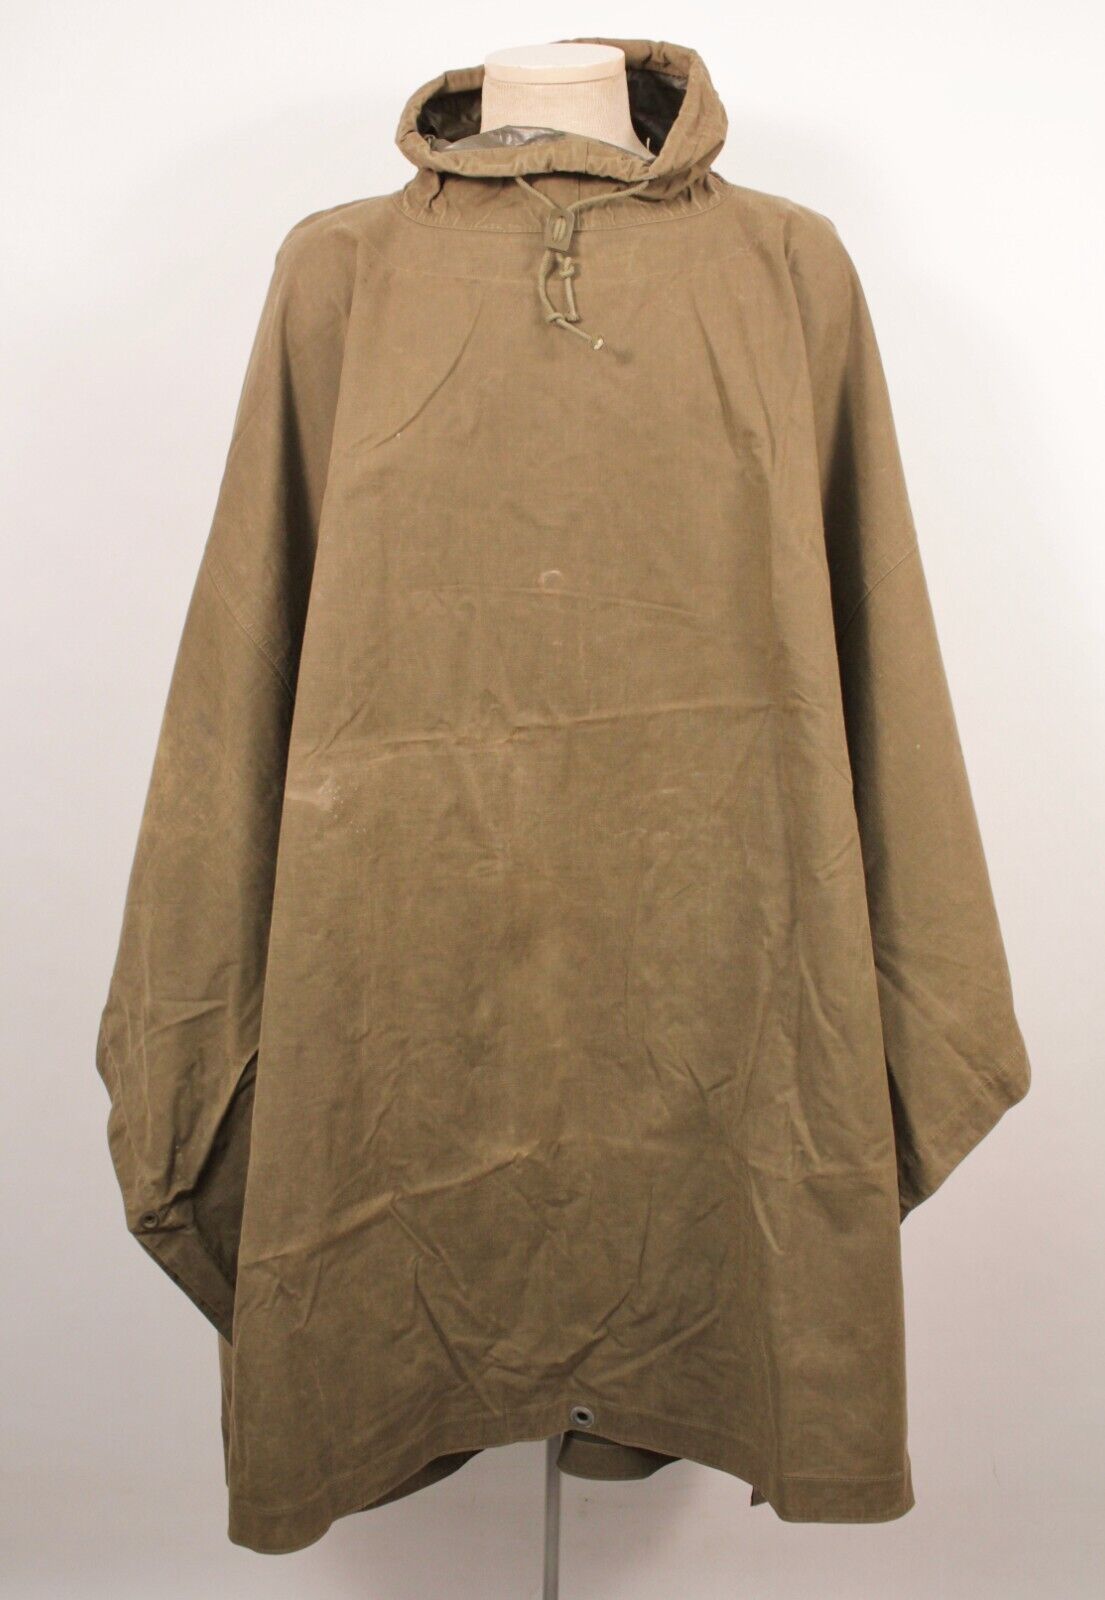 VTG 1940s WWII US Army  Synthetic Resin Coated Poncho 40s WW2 Rain Coat